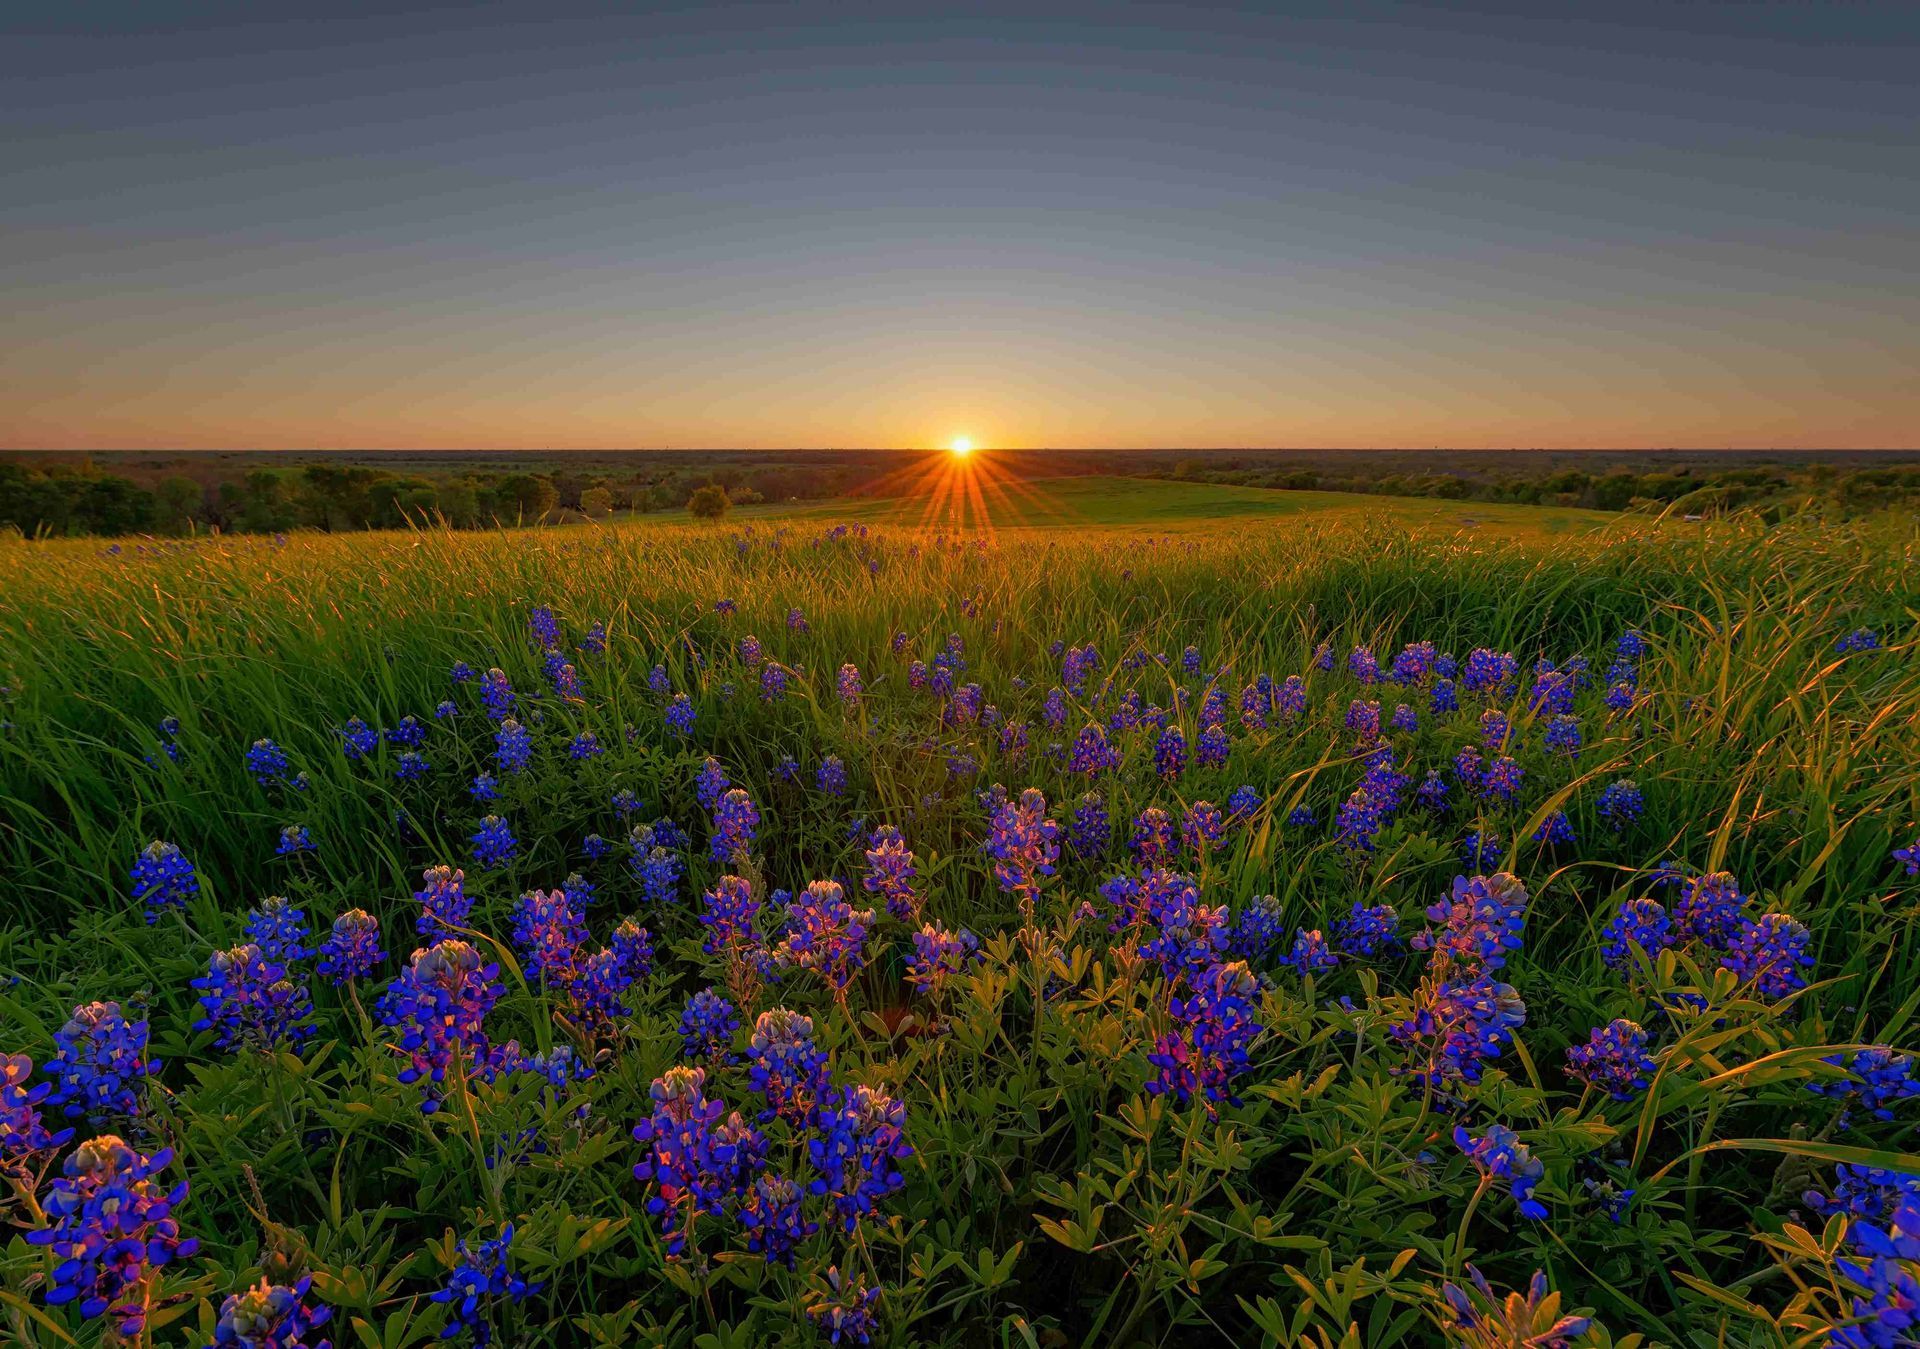 A photo of a field of flowers and sunset